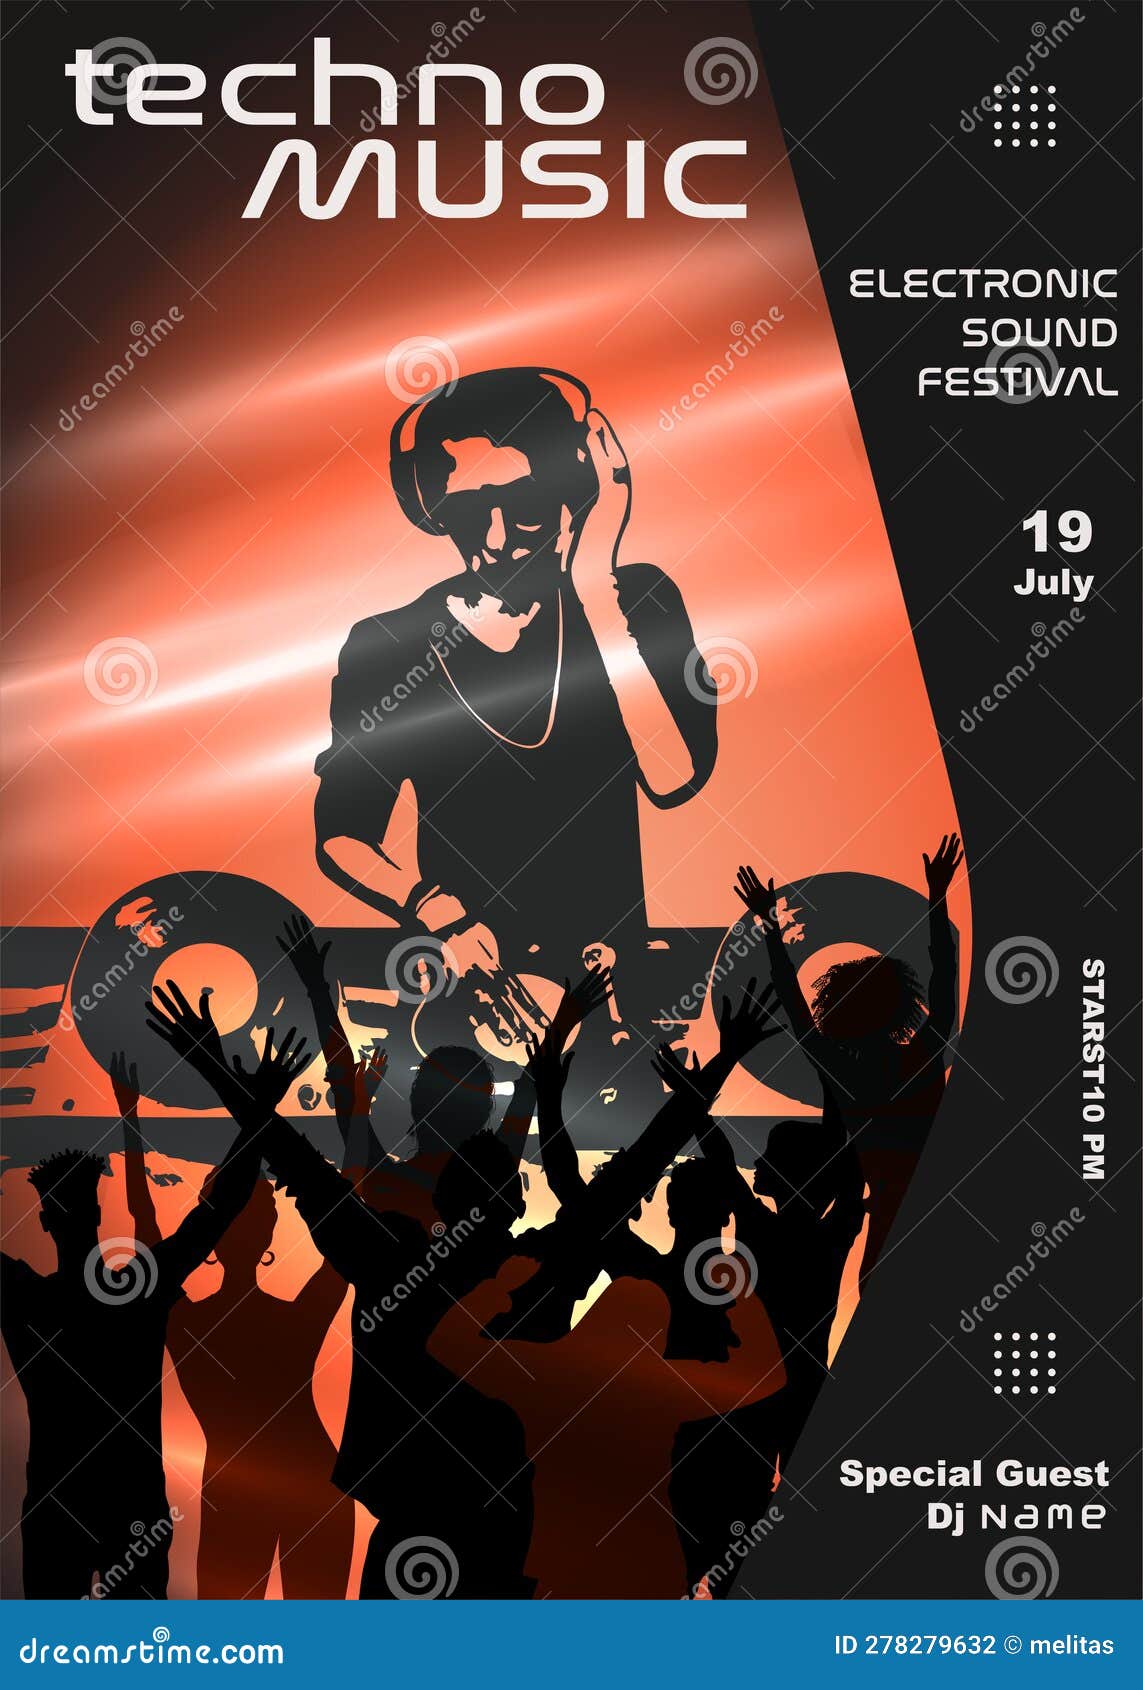 music festival event flyer poster. silhouette dj and people dancing with raised hands. graphic 